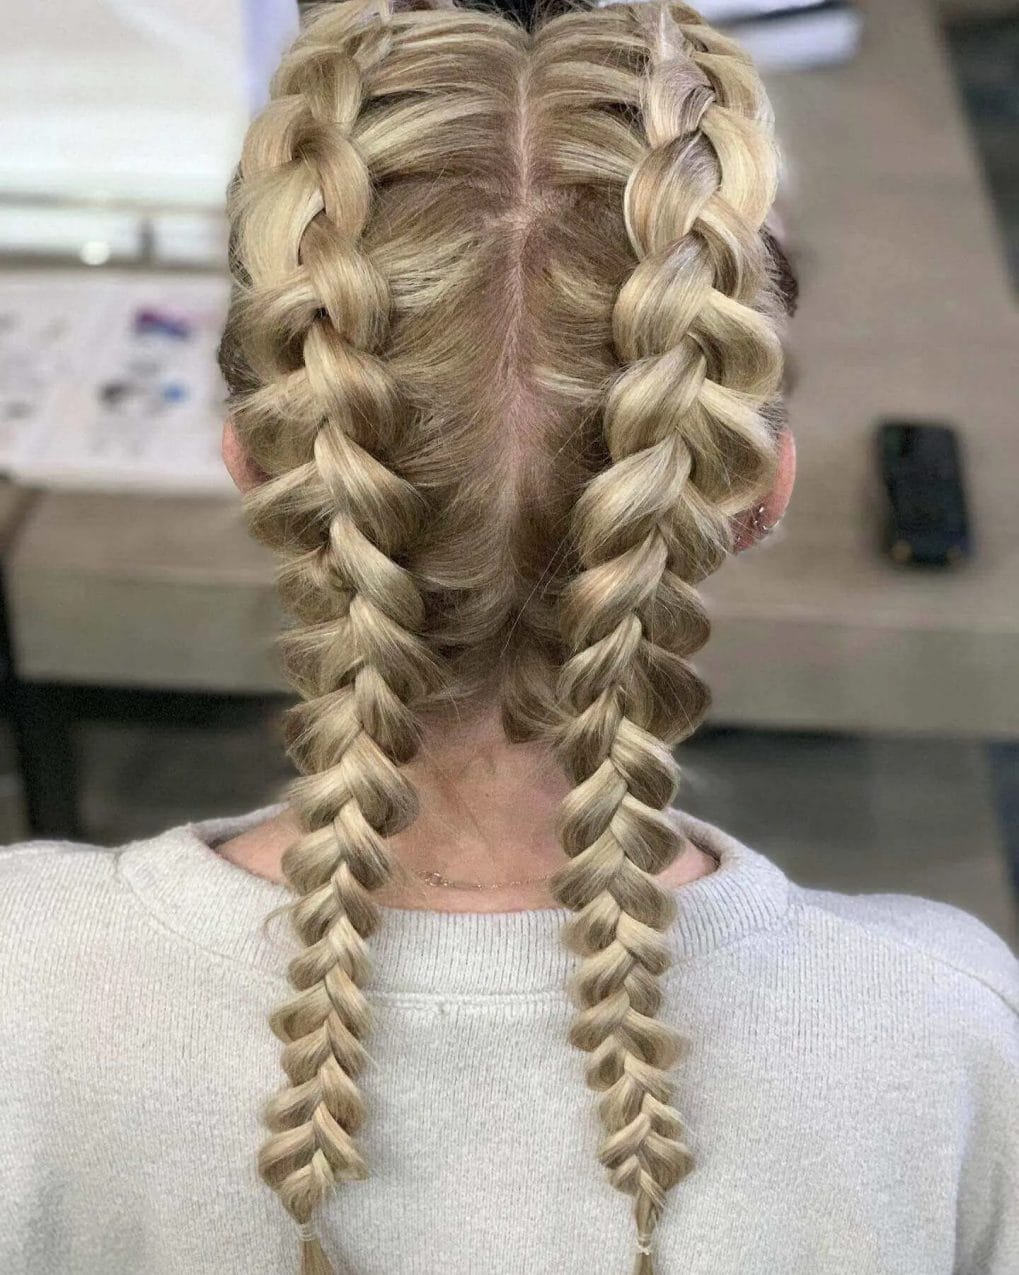 Symmetrical twin French braids with honeyed blond highlights.